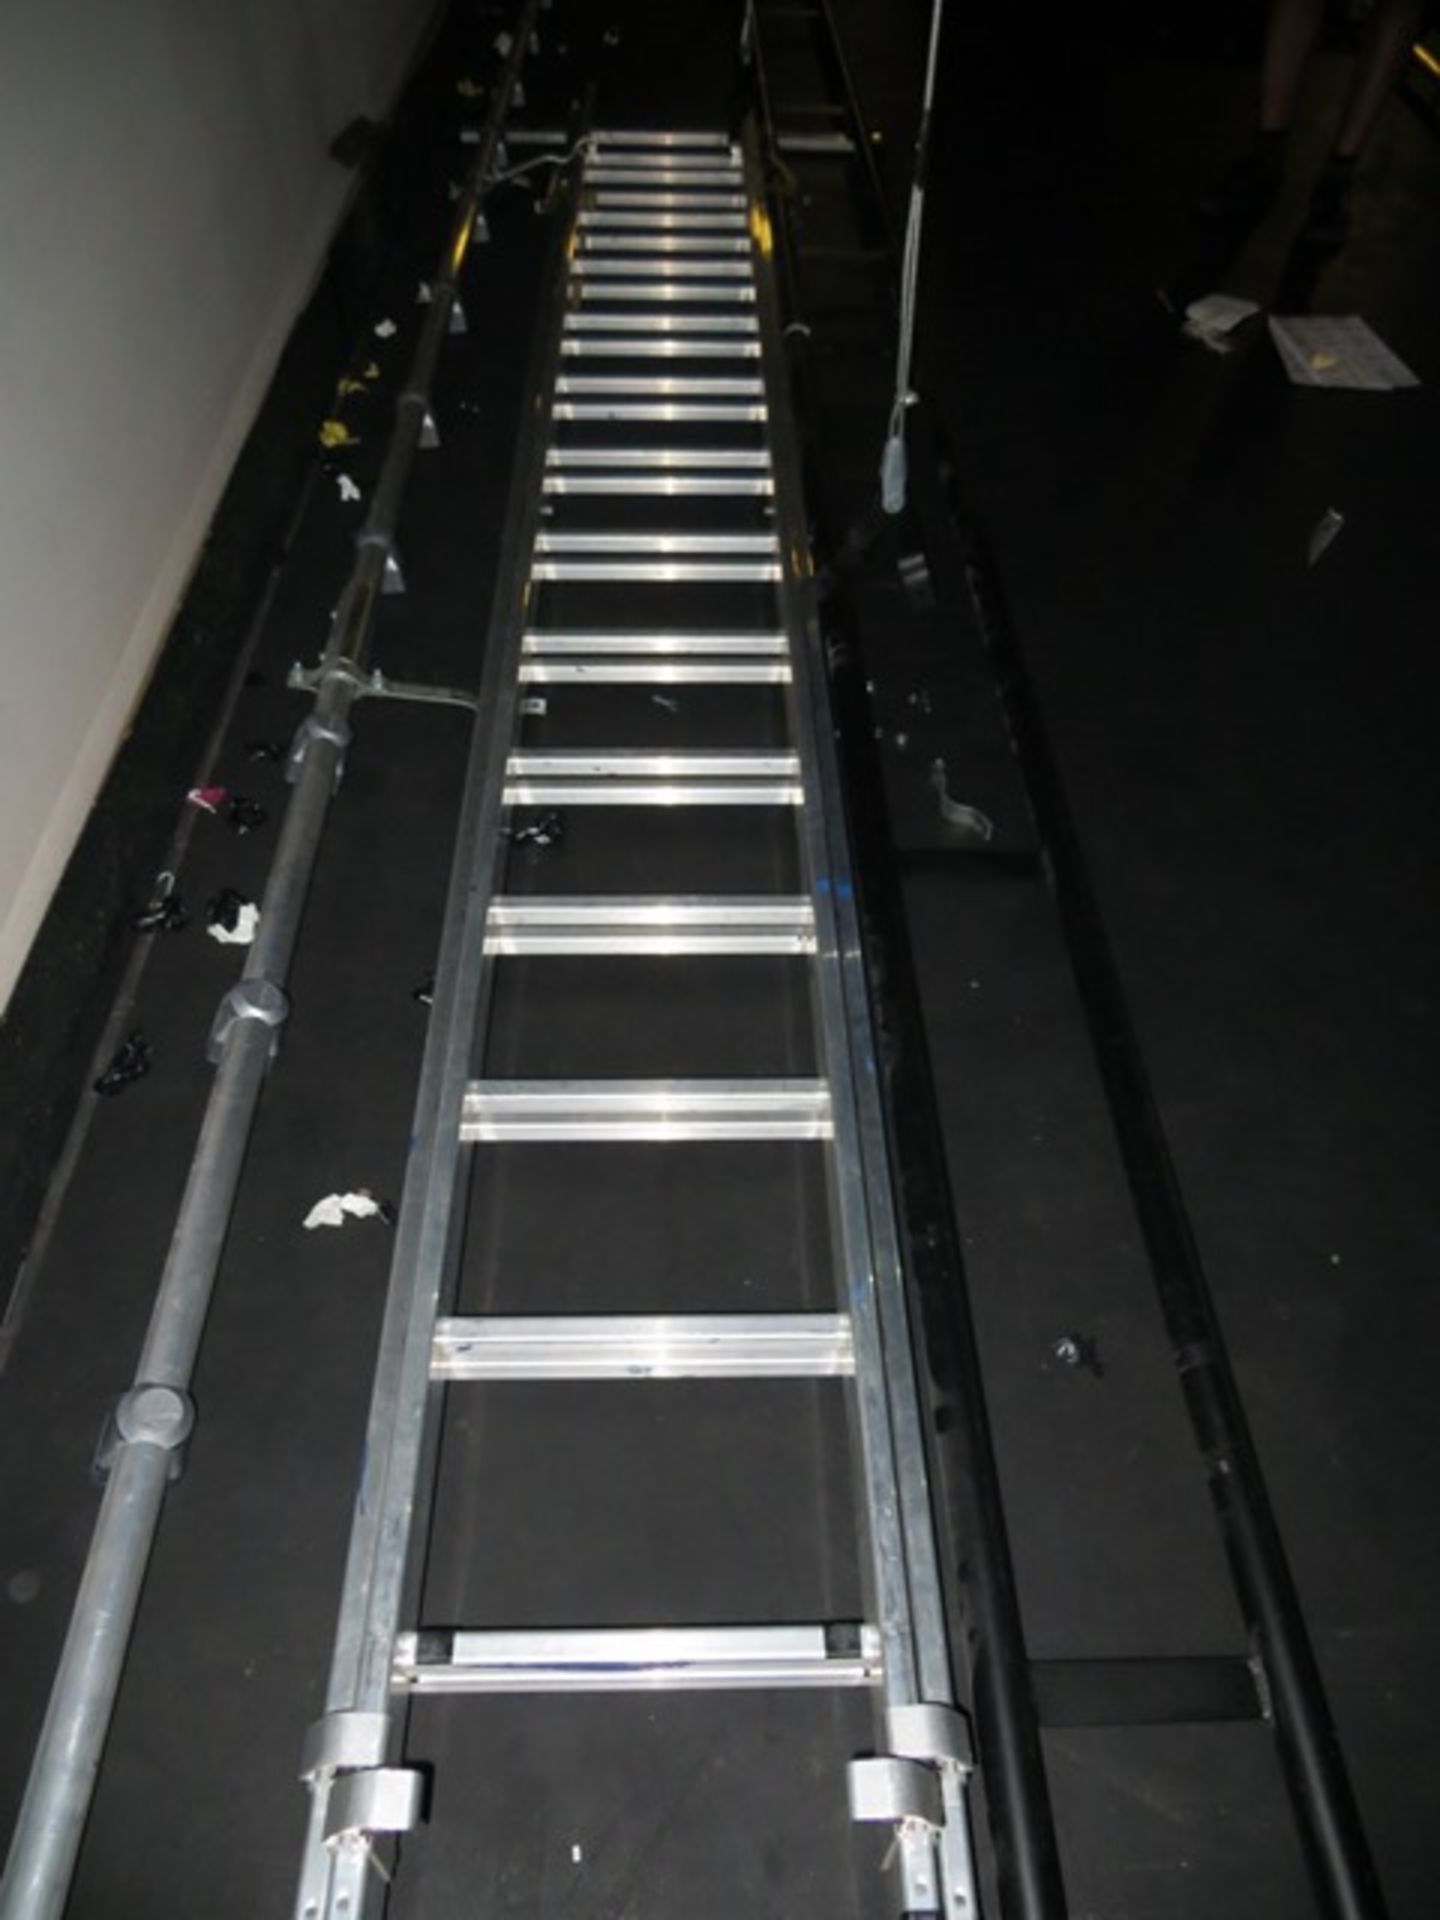 Zarges aluminium extension ladder, model 2600, working height: 4.15m - 9.70m (Please note, for